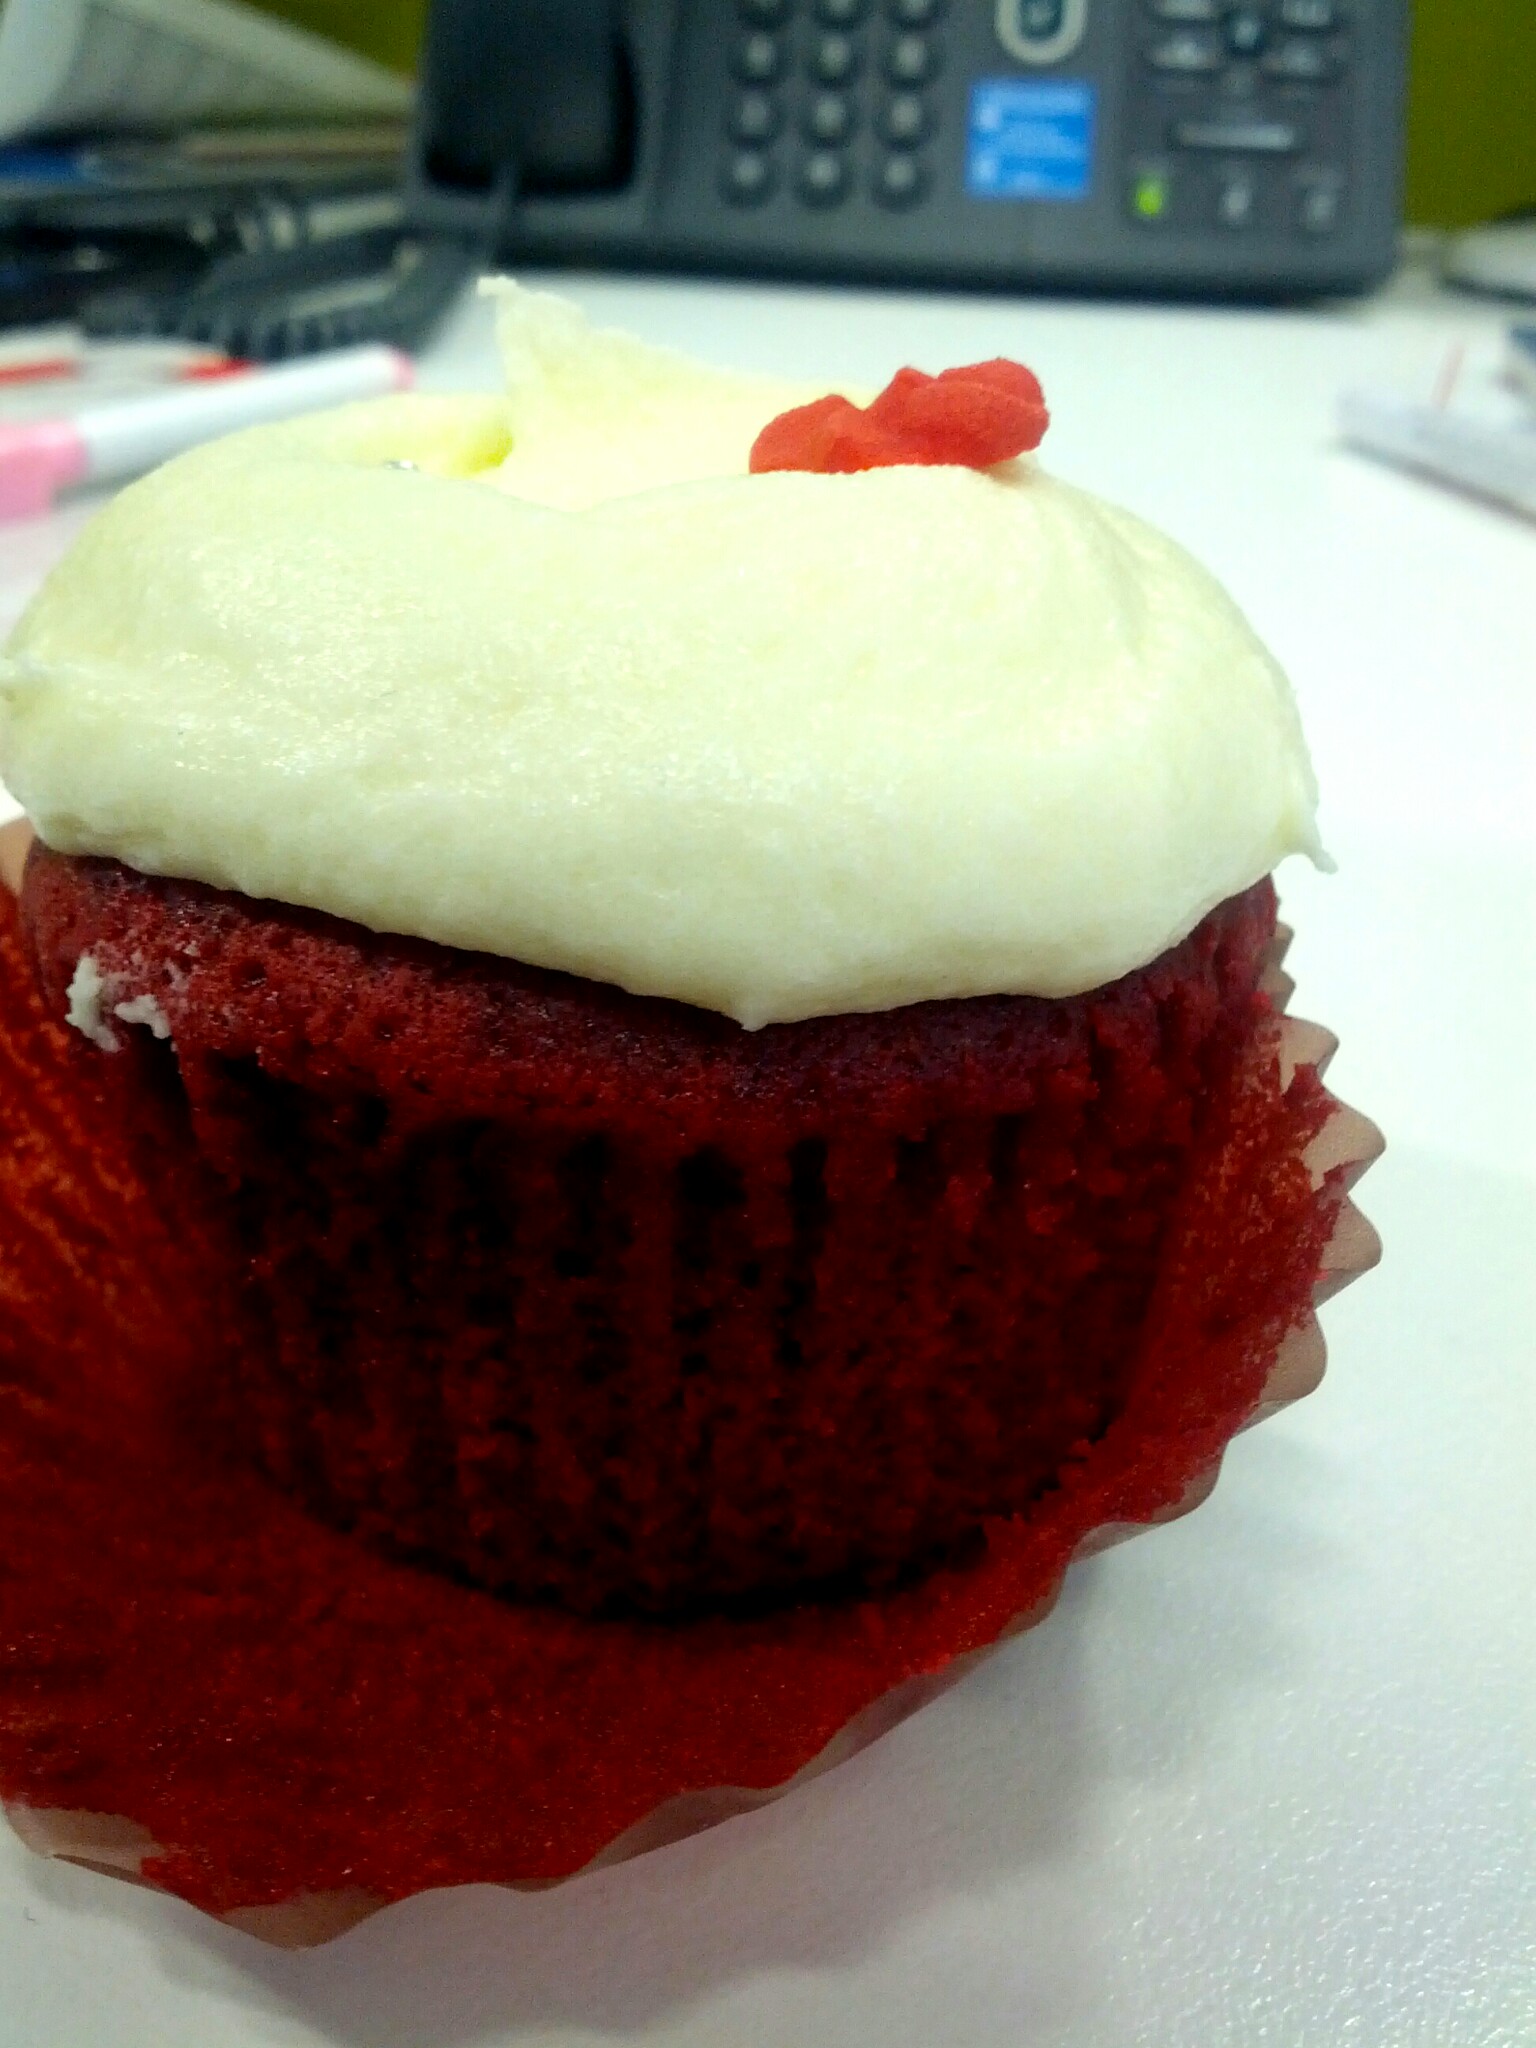 Red Velvet cupcakes they bought us at work